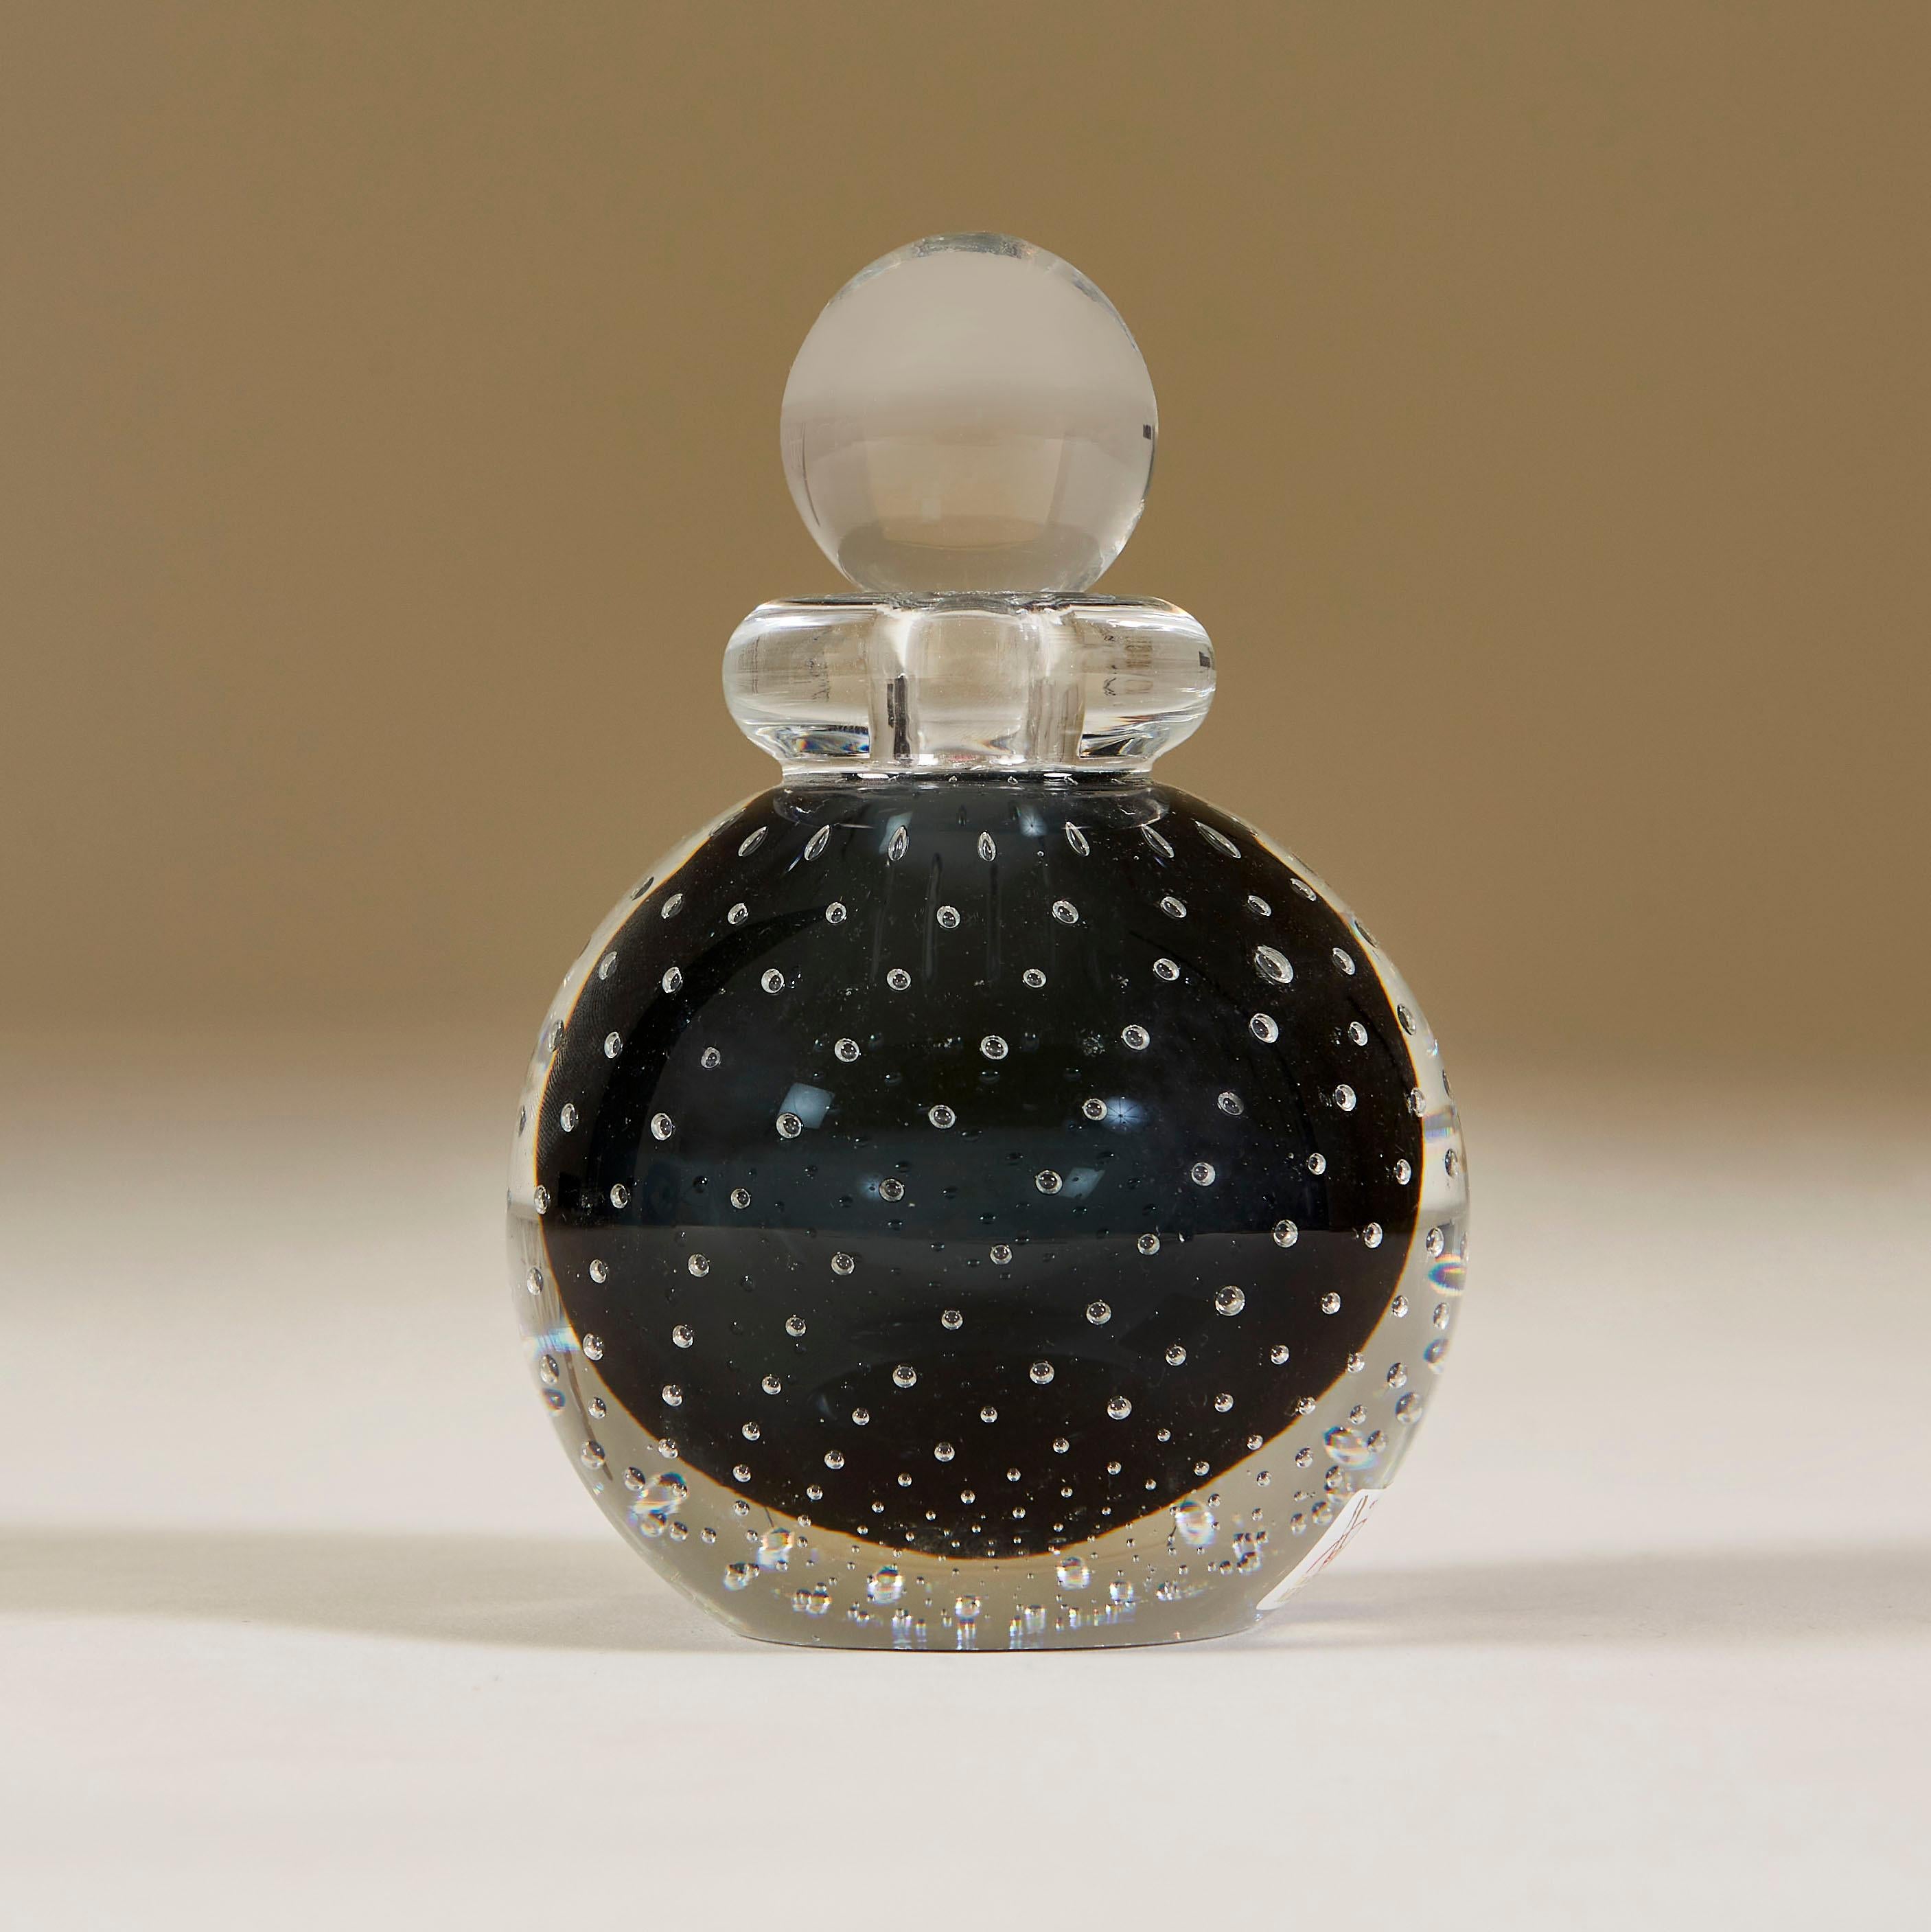 Rich red Bullicante ball perfume bottle cased in clear Murano glass with clear glass collar and ball stopper.

Made famous in the 1930s by Archimede Seguso, the Bullicante controlled bubbles technique involves overlaying several layers of air